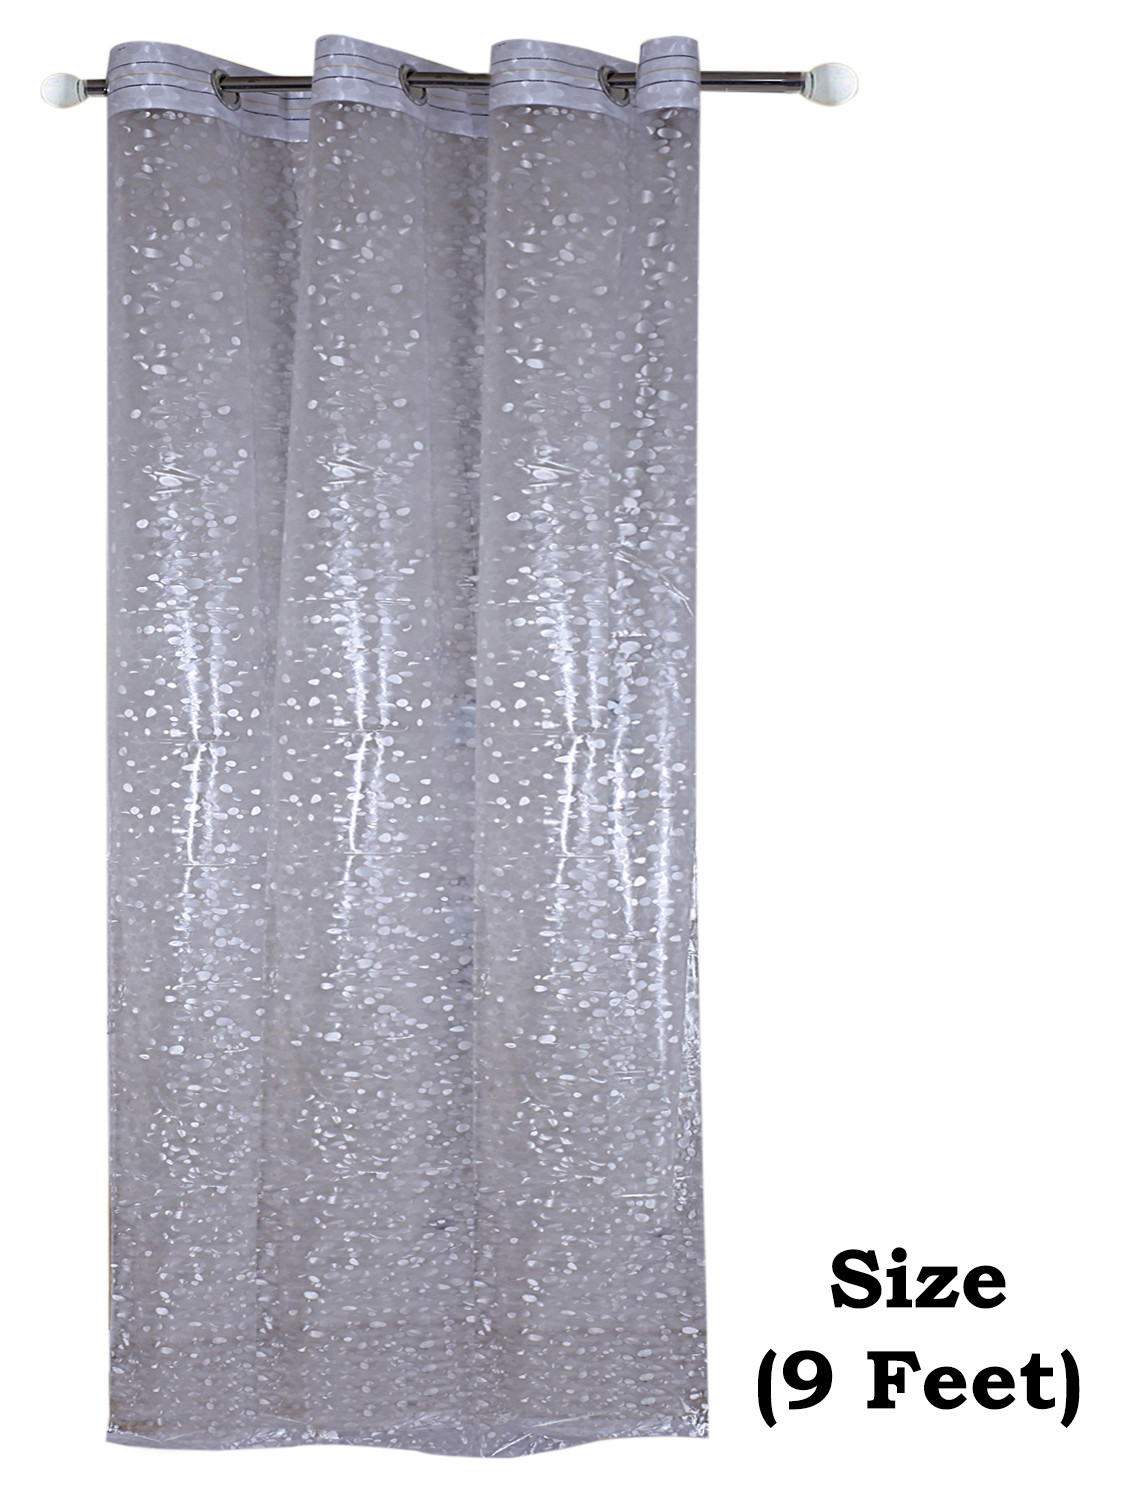 Kuber Industries Stone Print Stain-Resistant & Waterproof PVC AC Curtain For Home, office, restaurant 9 Feet With 6 Grommets (Transparent)